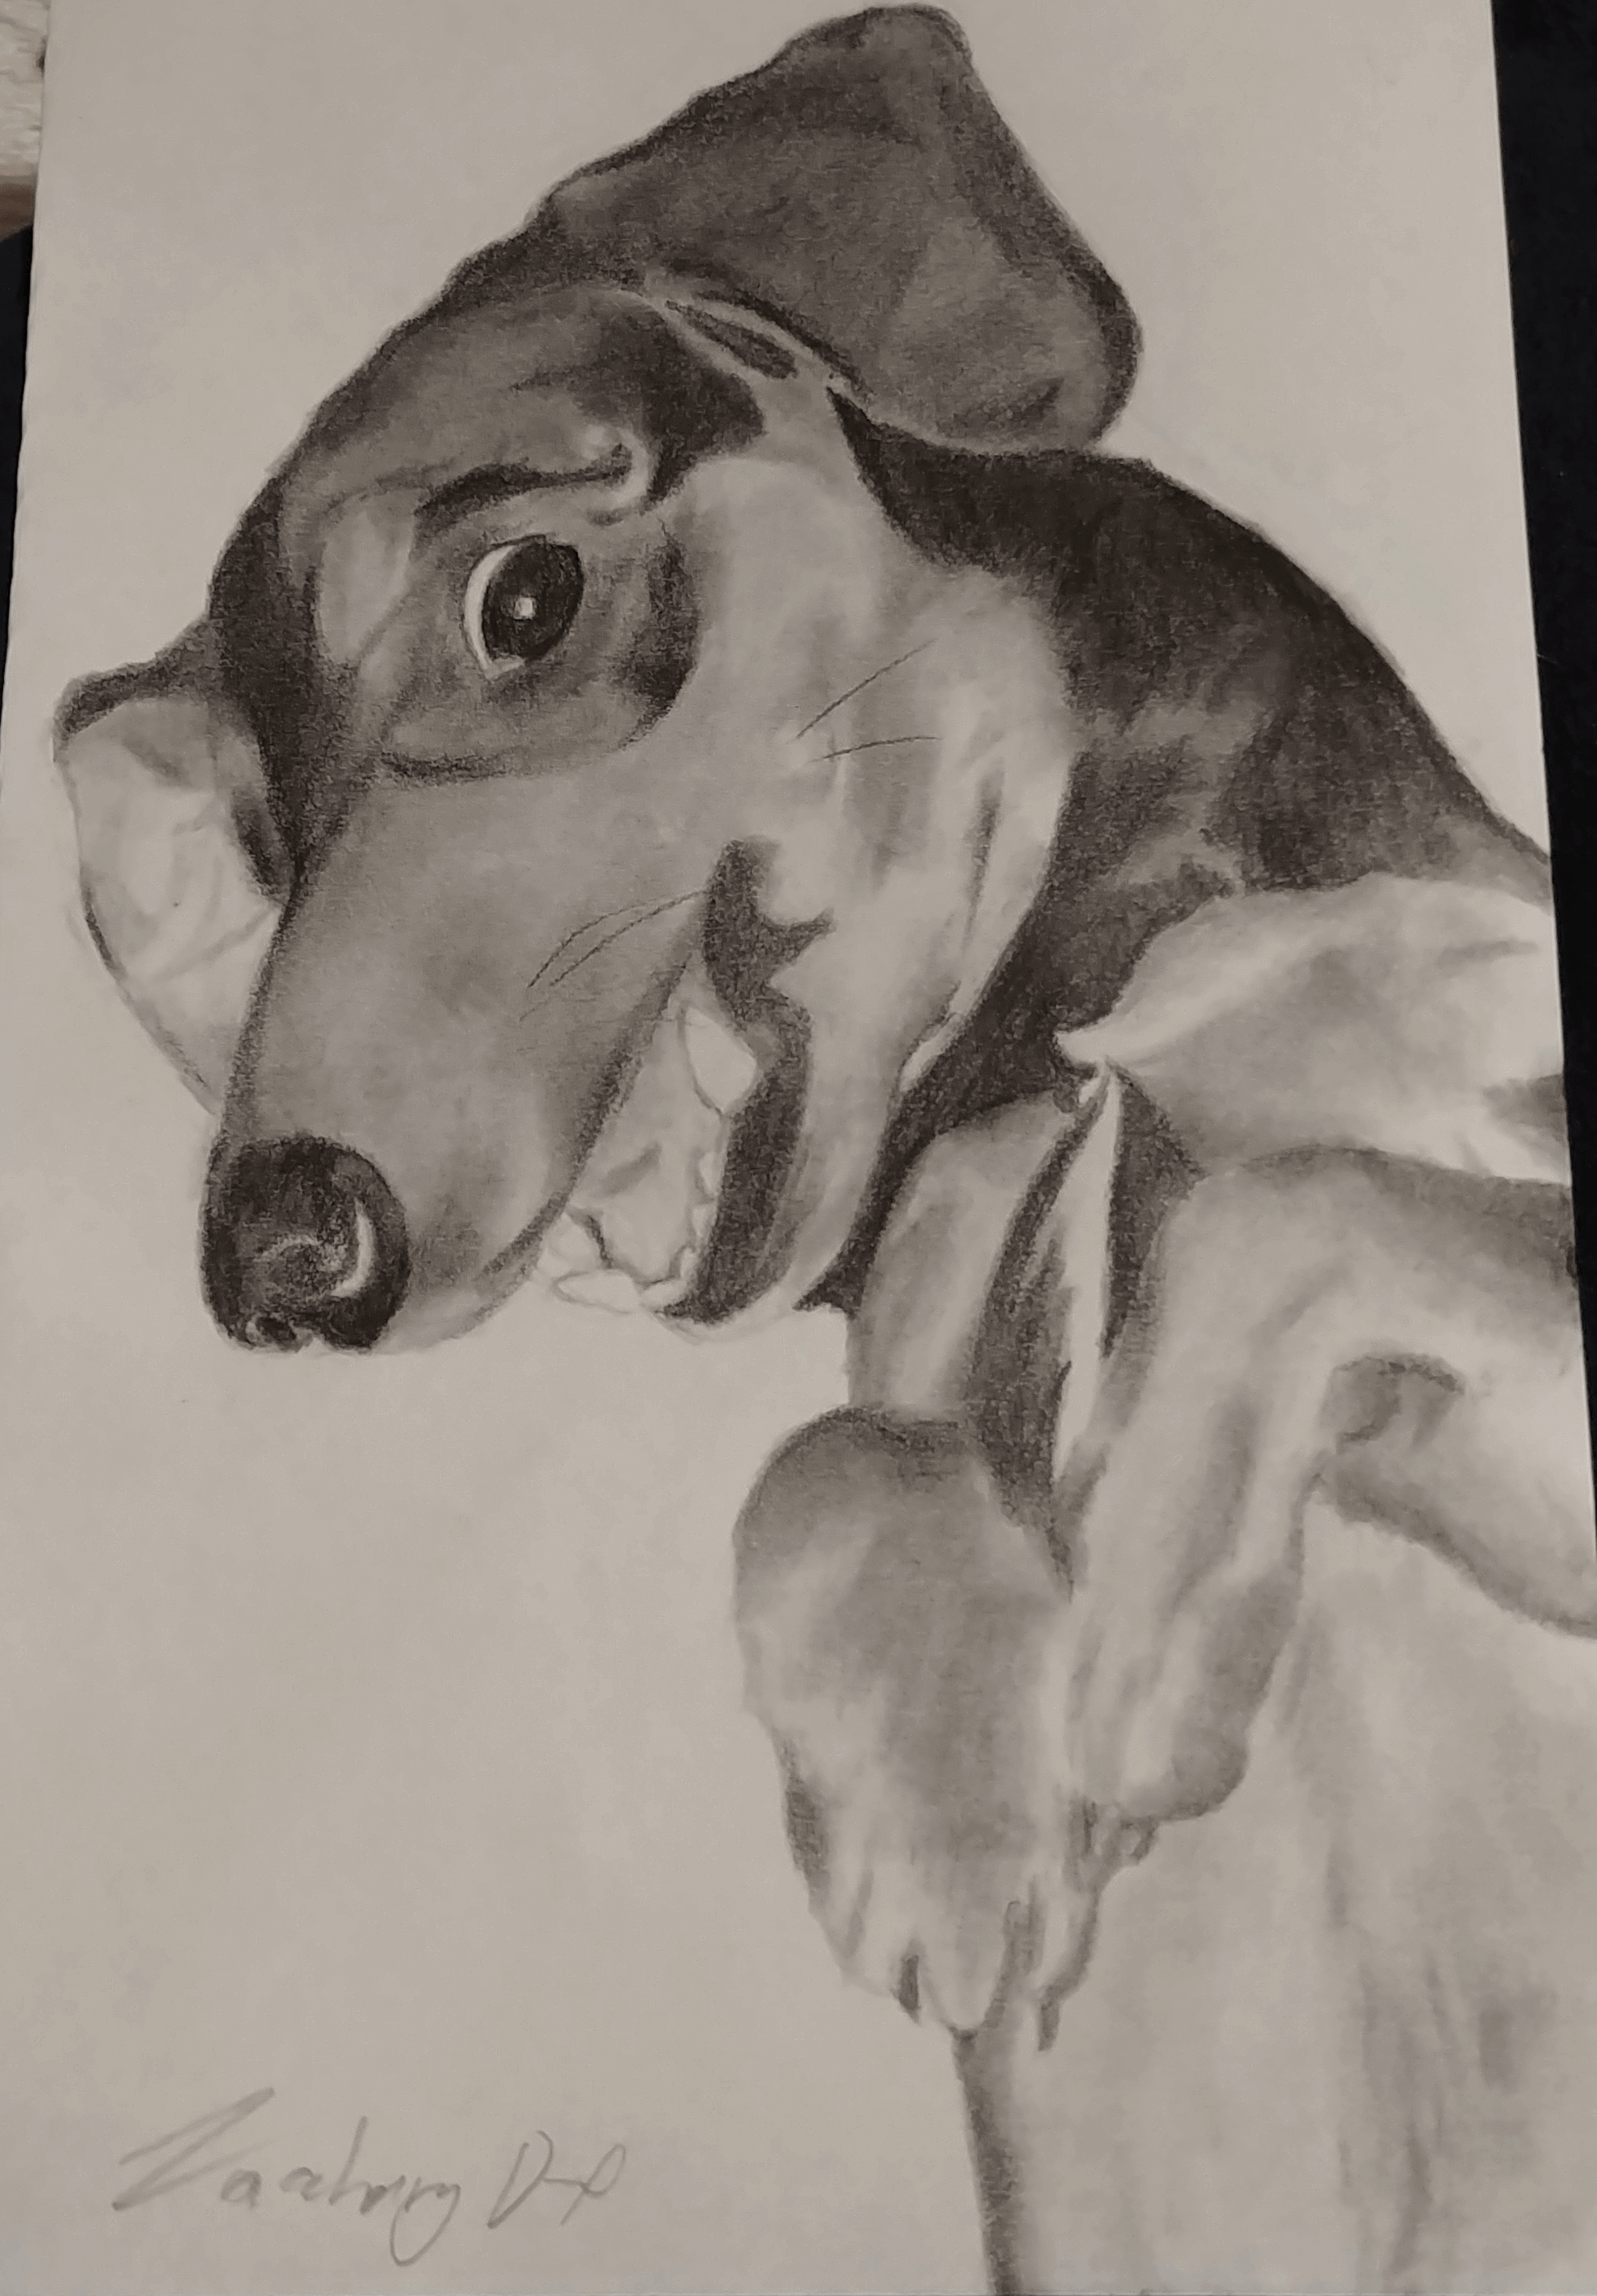 A pencil drawing of Khiron, my puppy, lying on his back with his paws in the air, smiling happily.